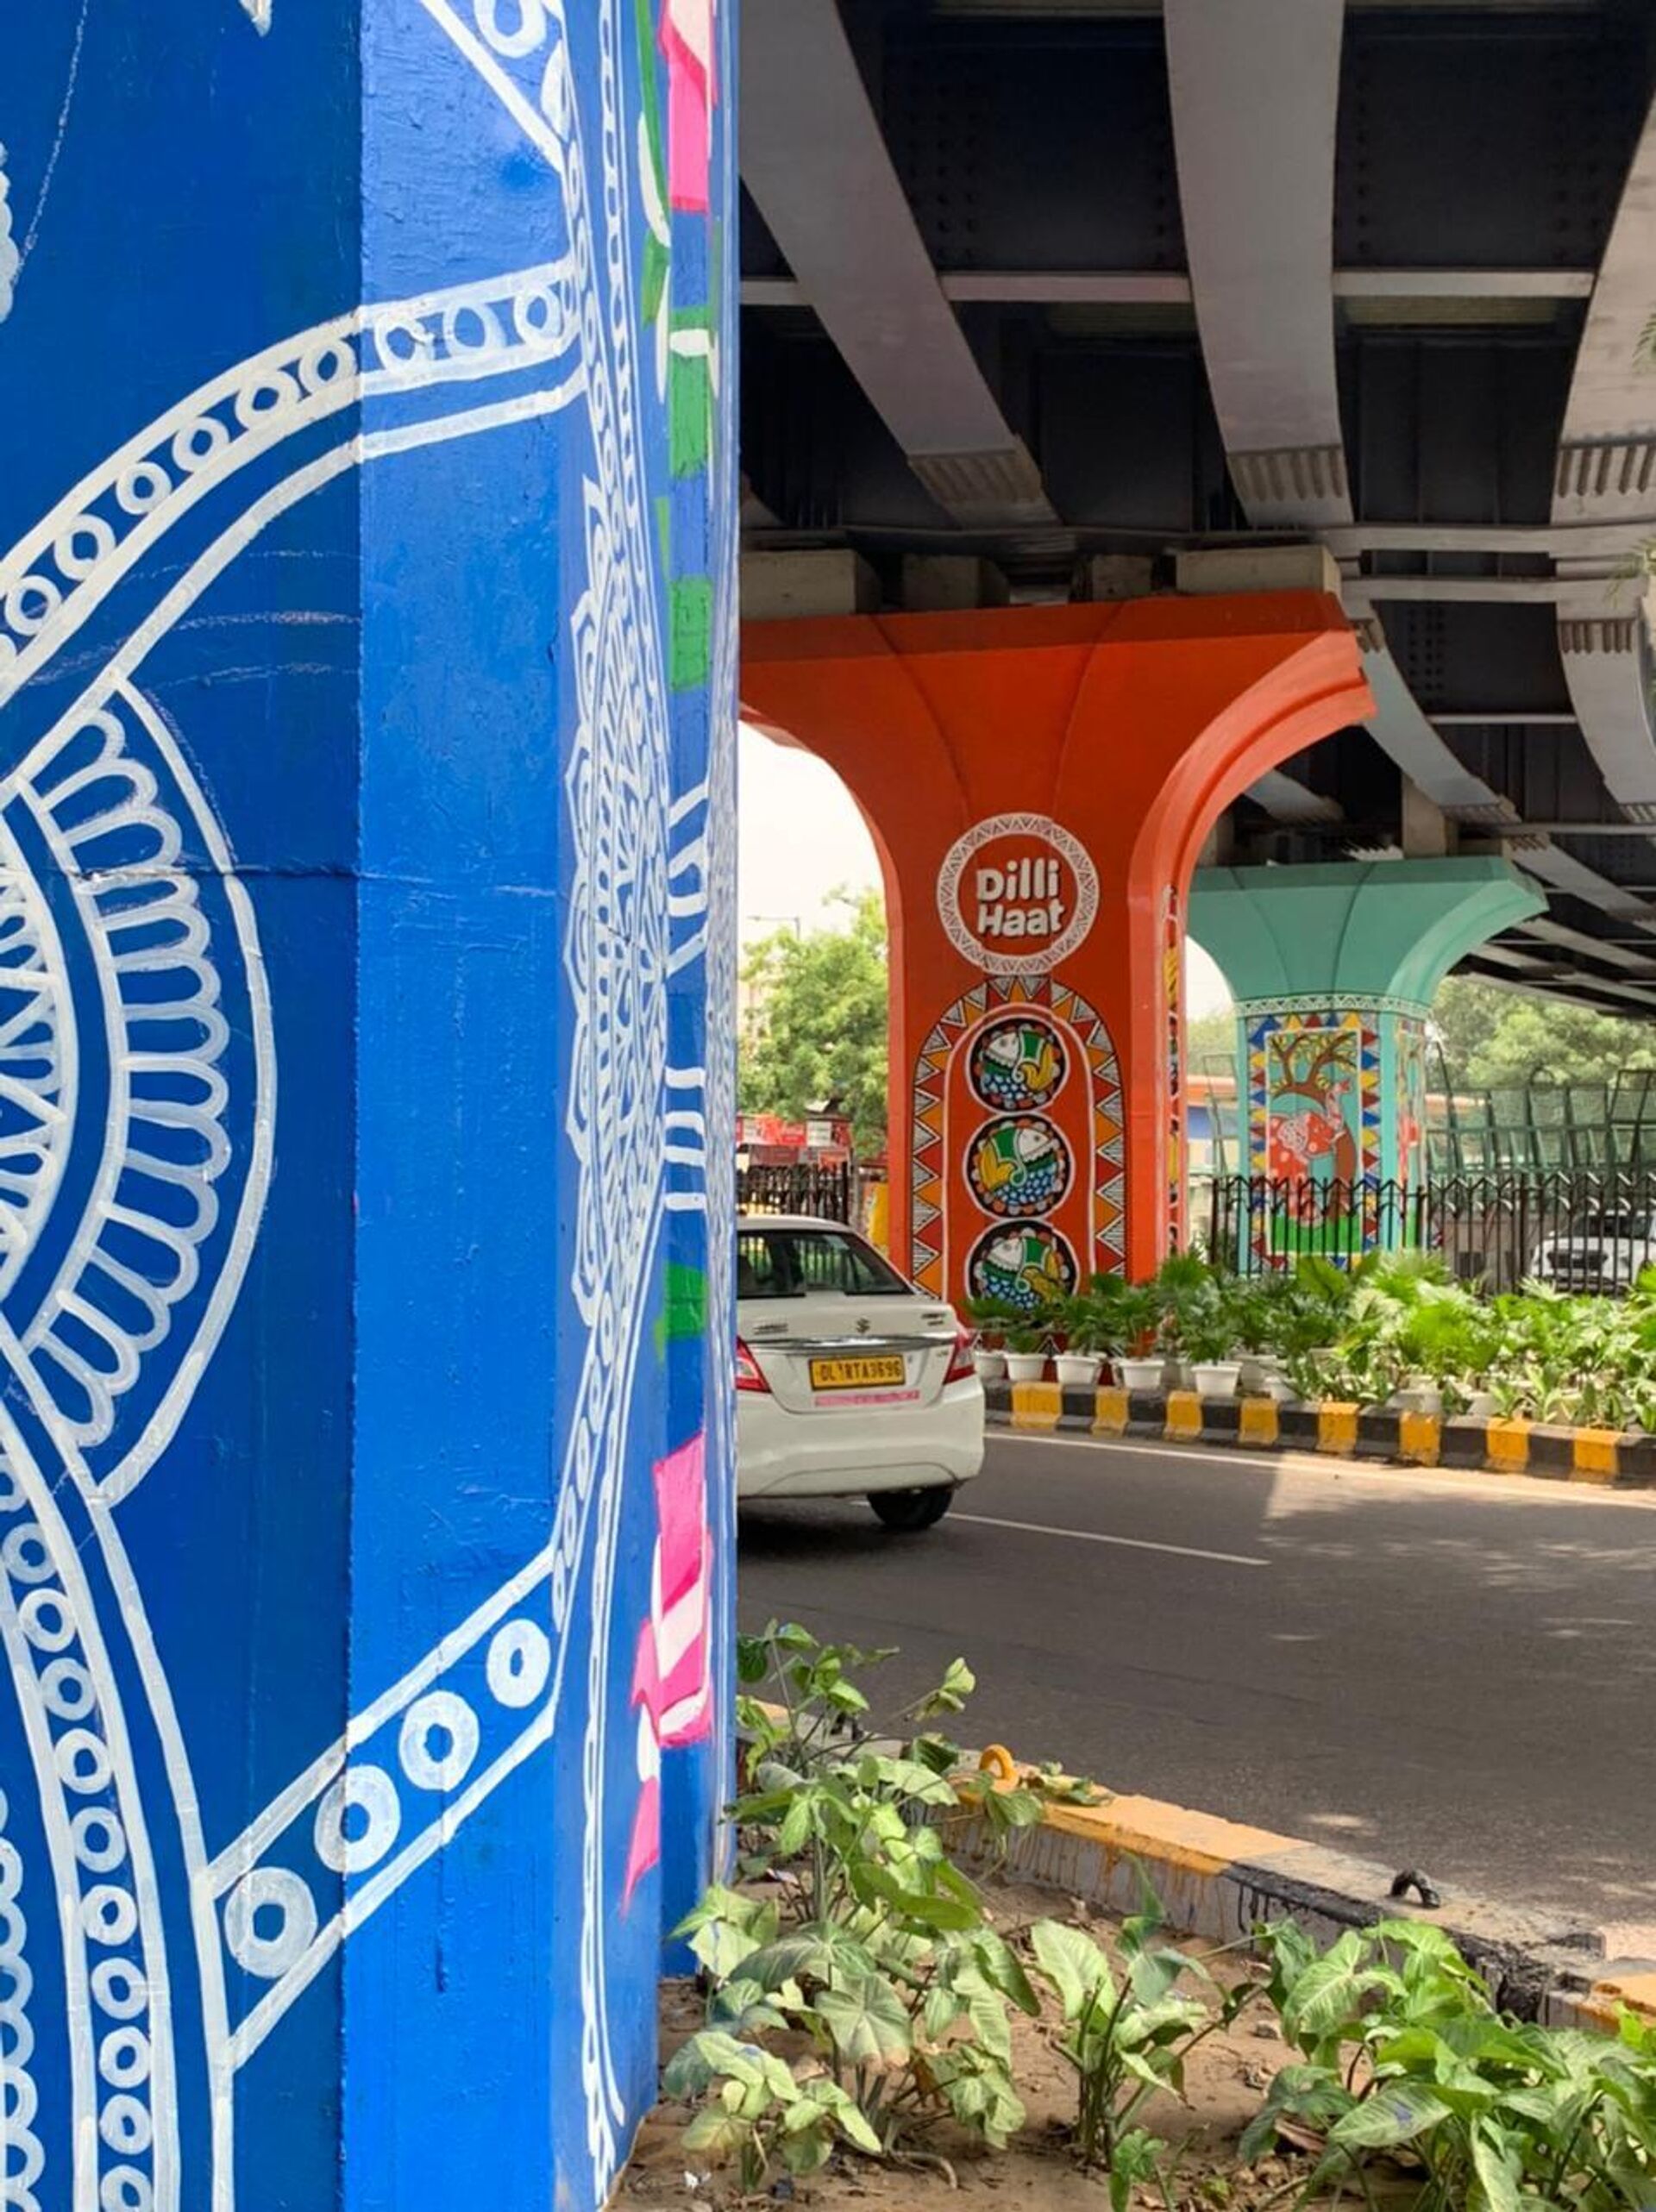 Delhi Street Art artists painted the town with creative murals on the walls of flyovers, pillars and buildings ahead of G20 Summit in New Delhi. - Sputnik India, 1920, 08.09.2023